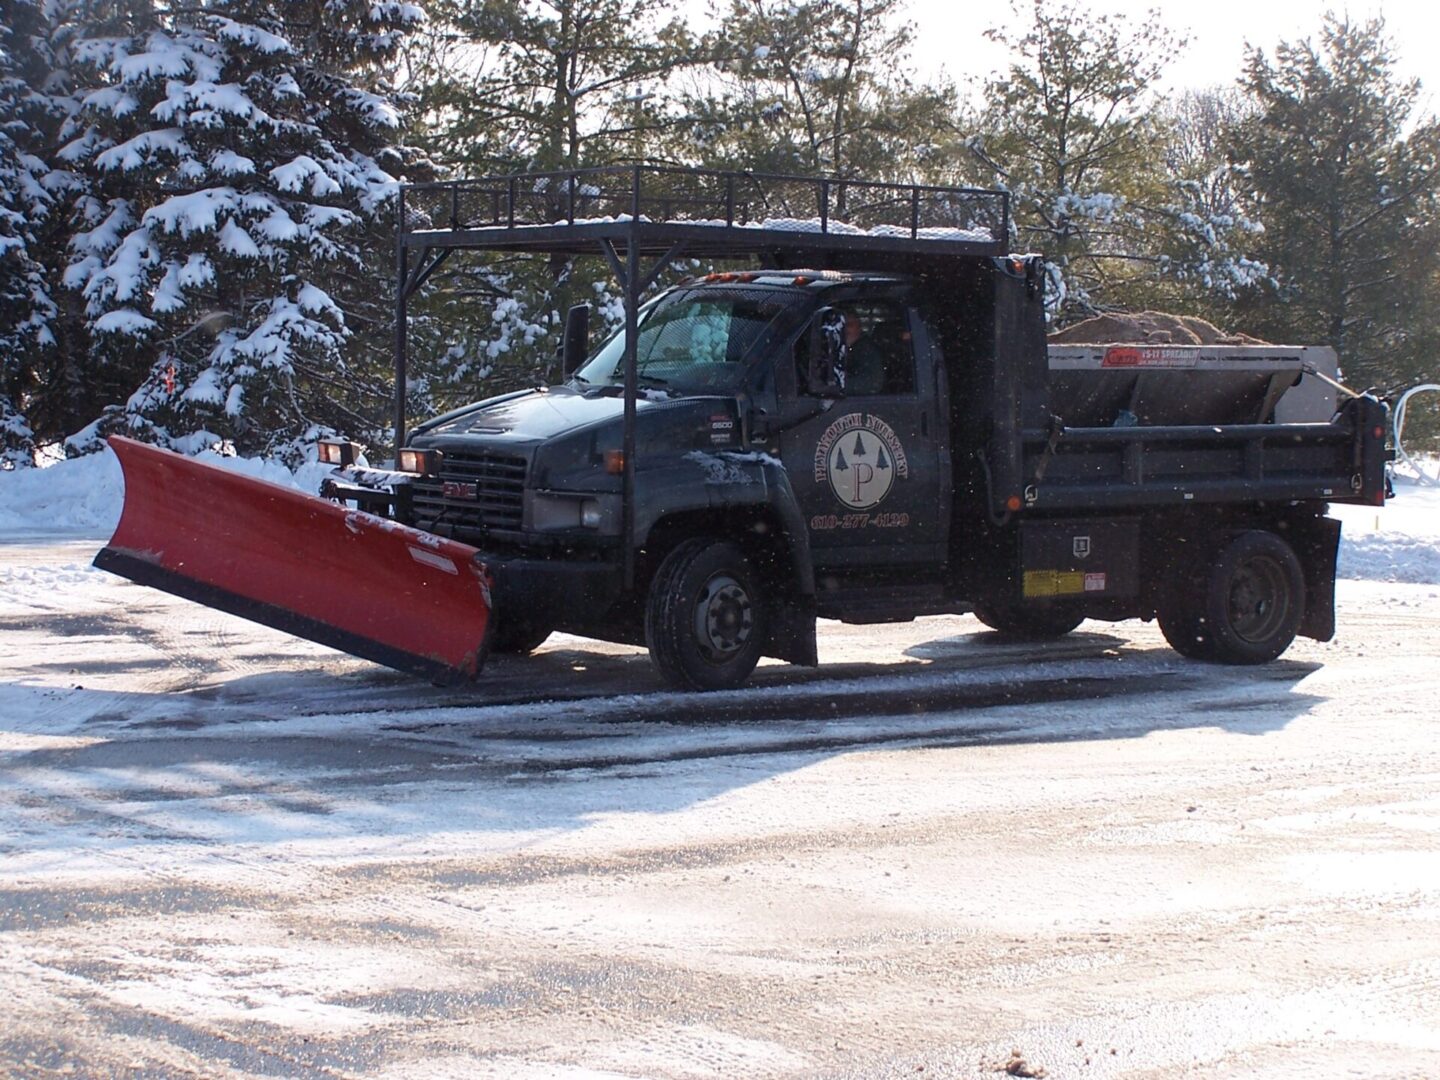 a truck for clearing the snow on the road